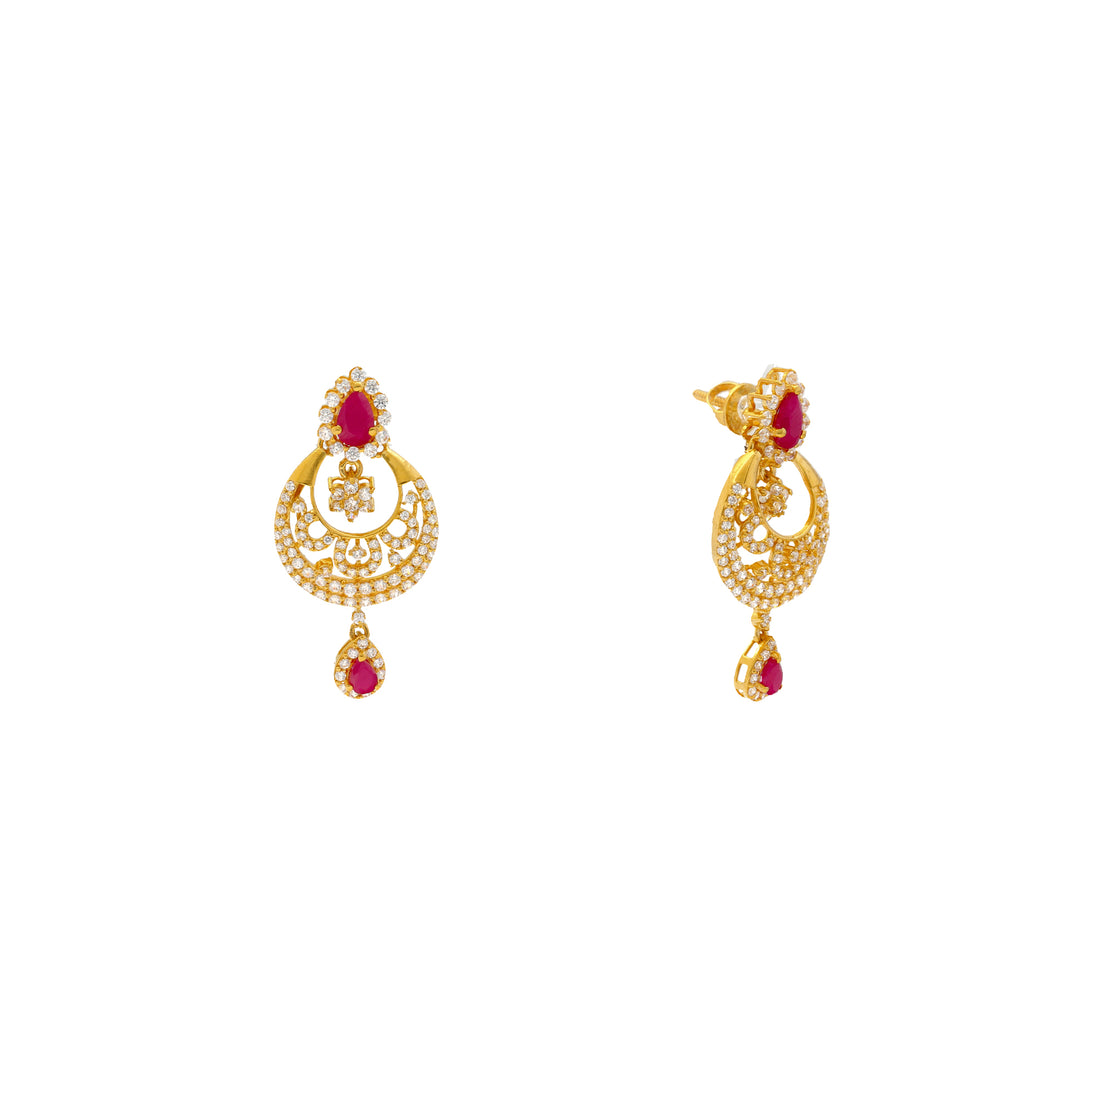 Premium Quality Cz Stone Earring With Ruby And Green Stone Hanging White  Pearl Earring Buy Online